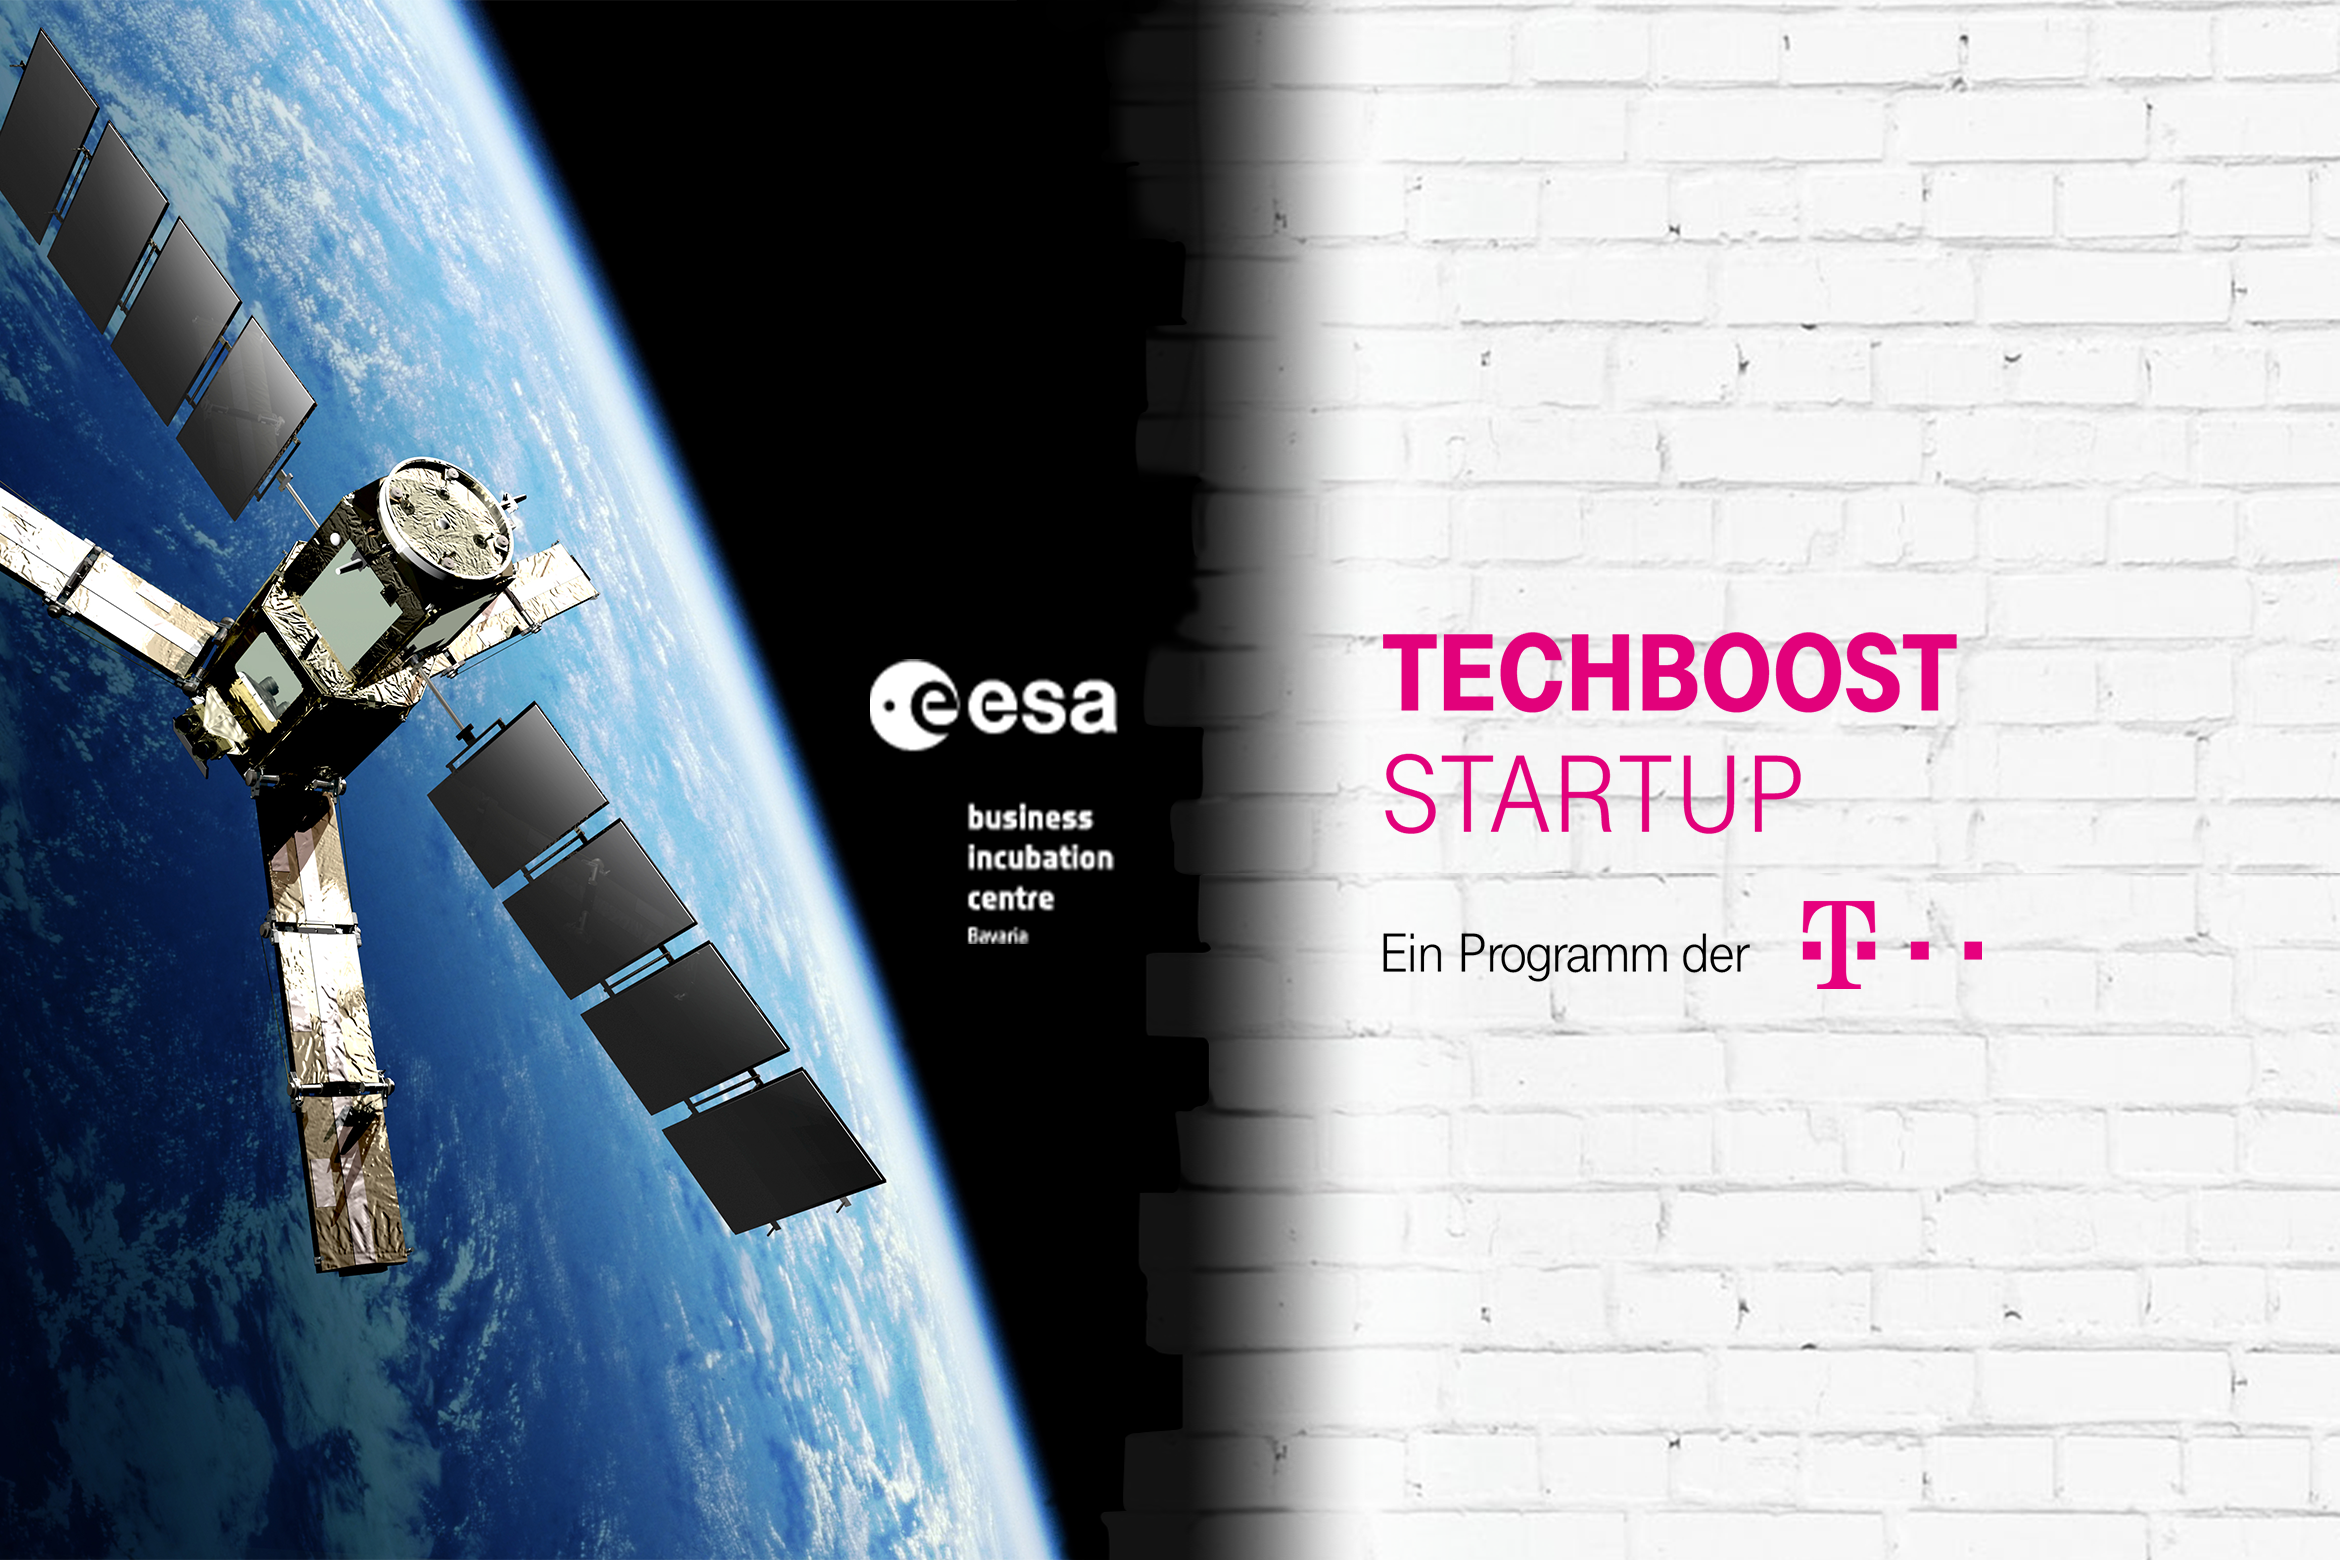 Our Partnerships with ESA and Telekom